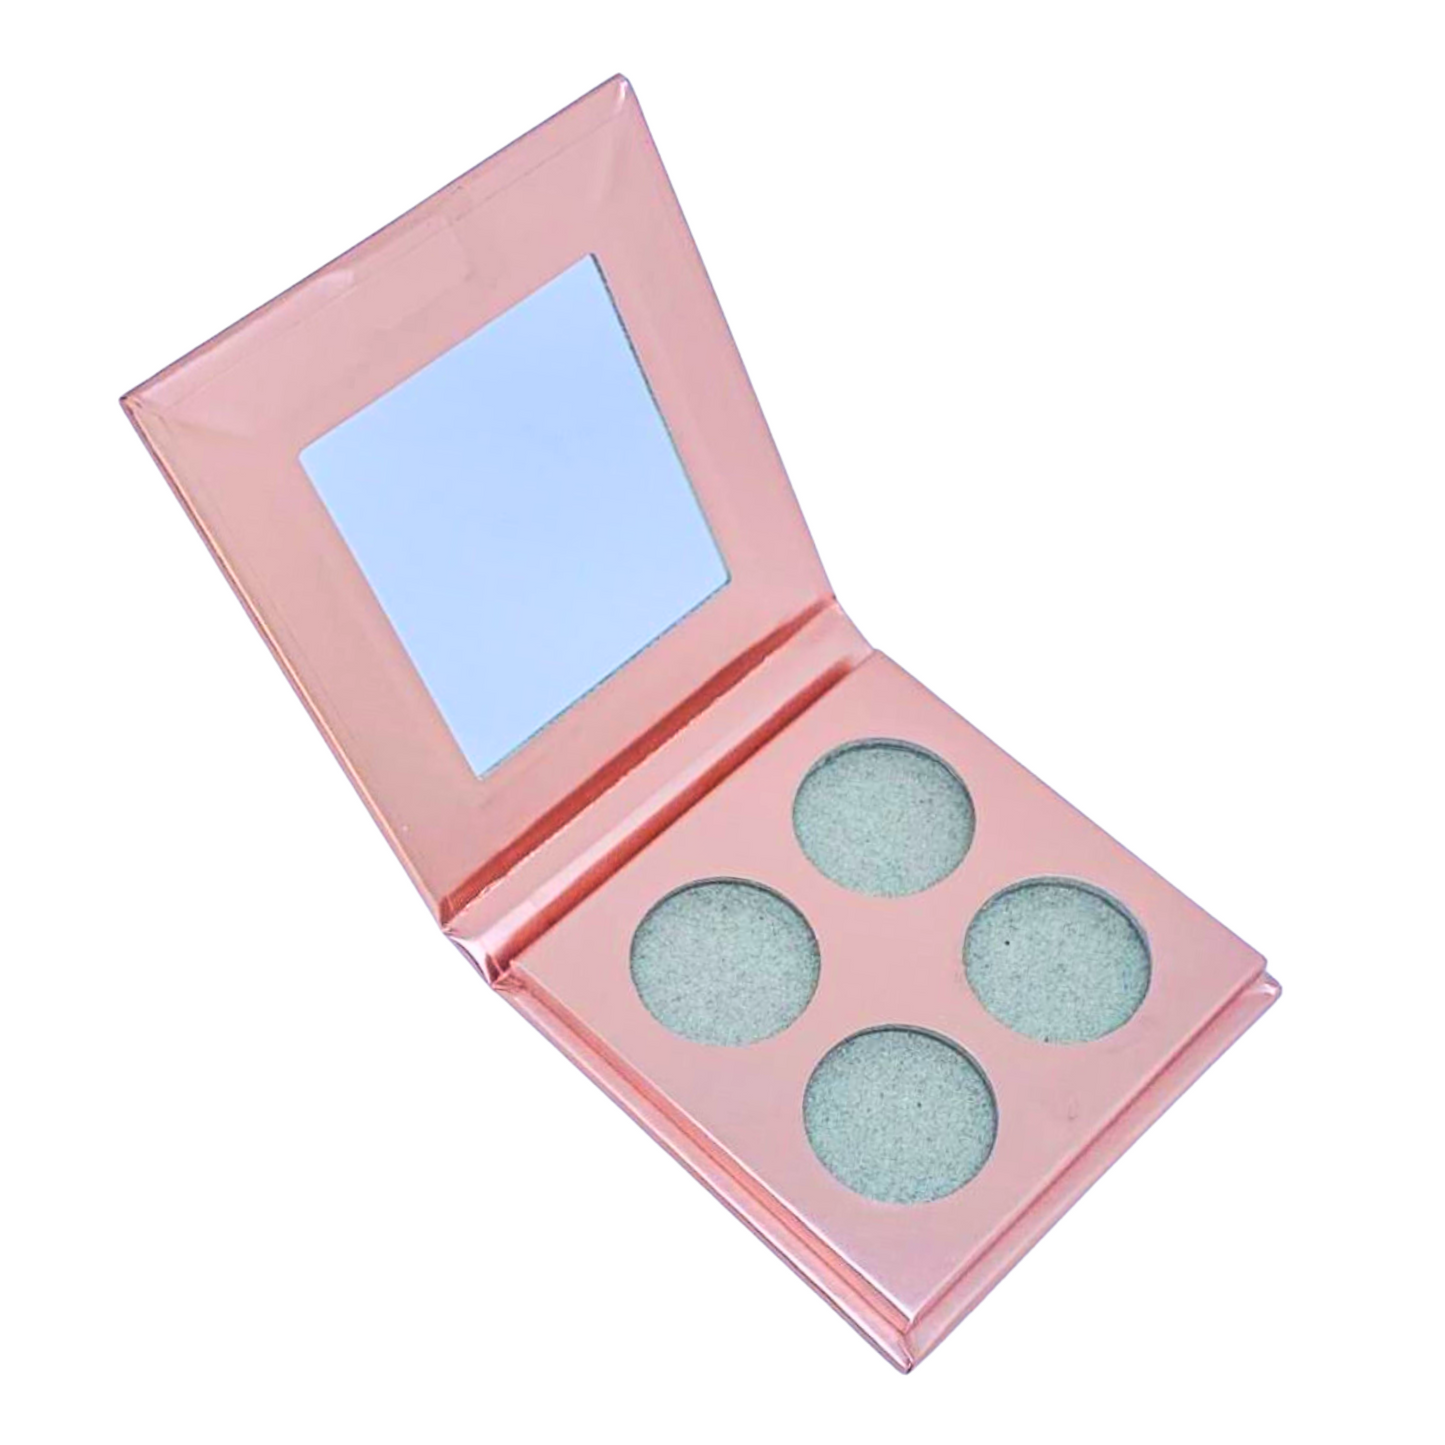 Bring Out Those Baby Blues Bridal Makeup Collection